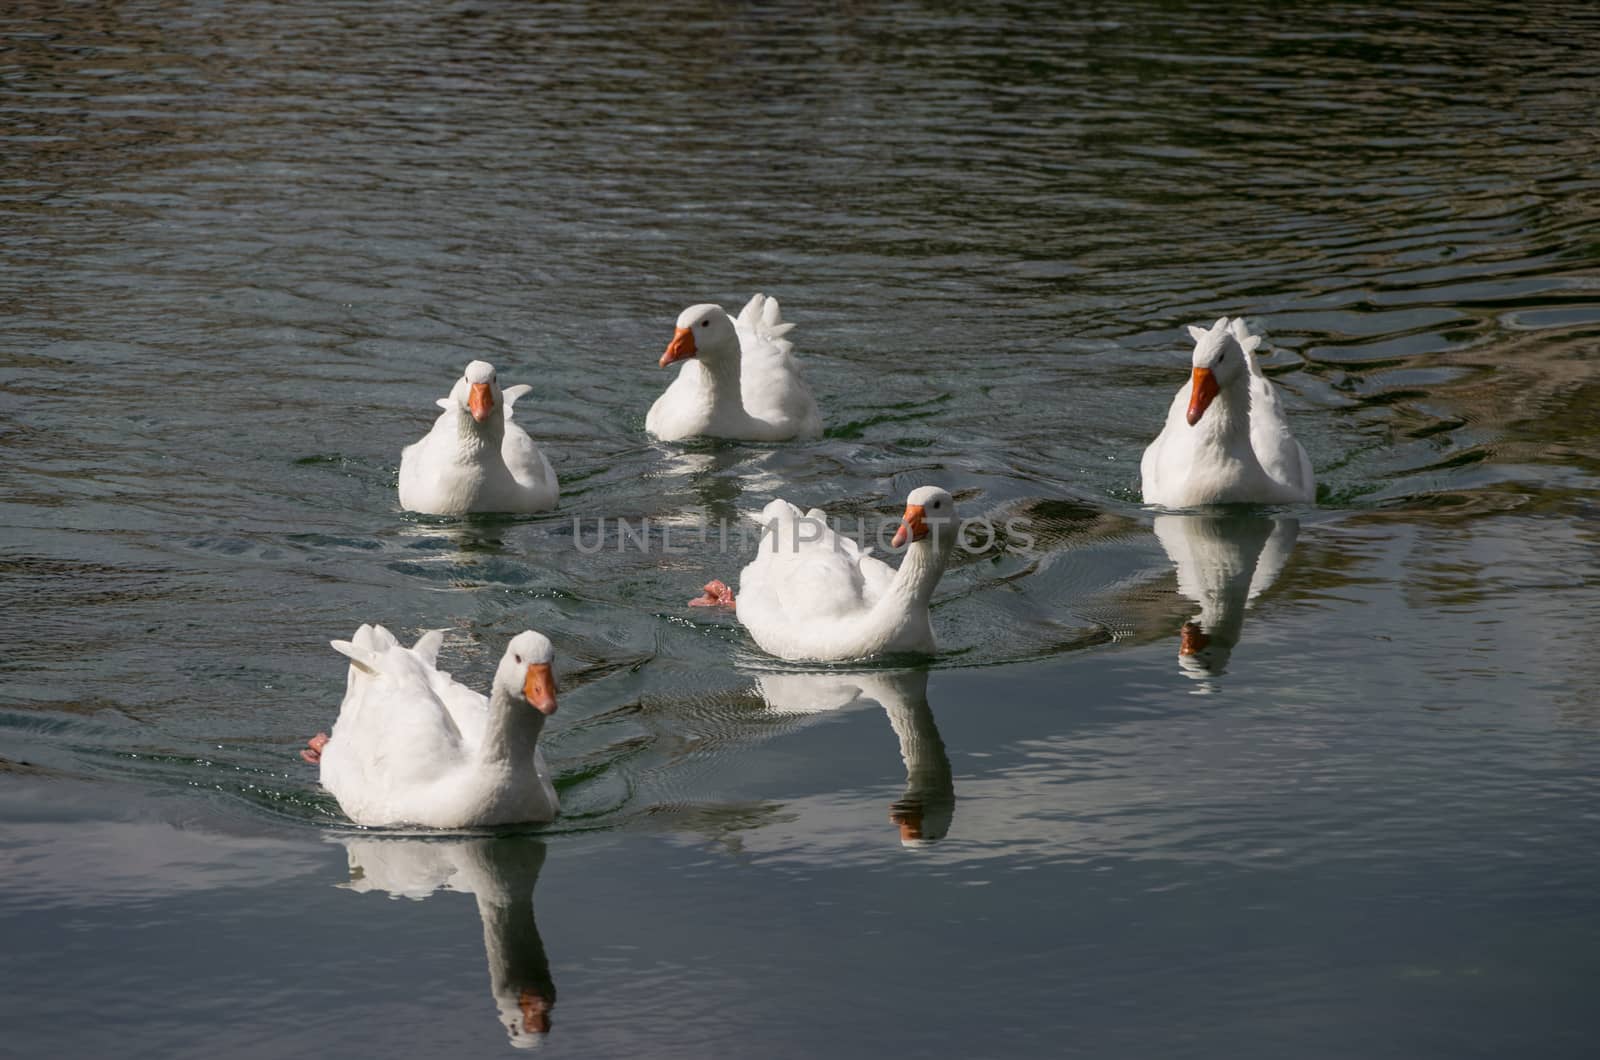 Gooses while swimming in a small lake of Crete